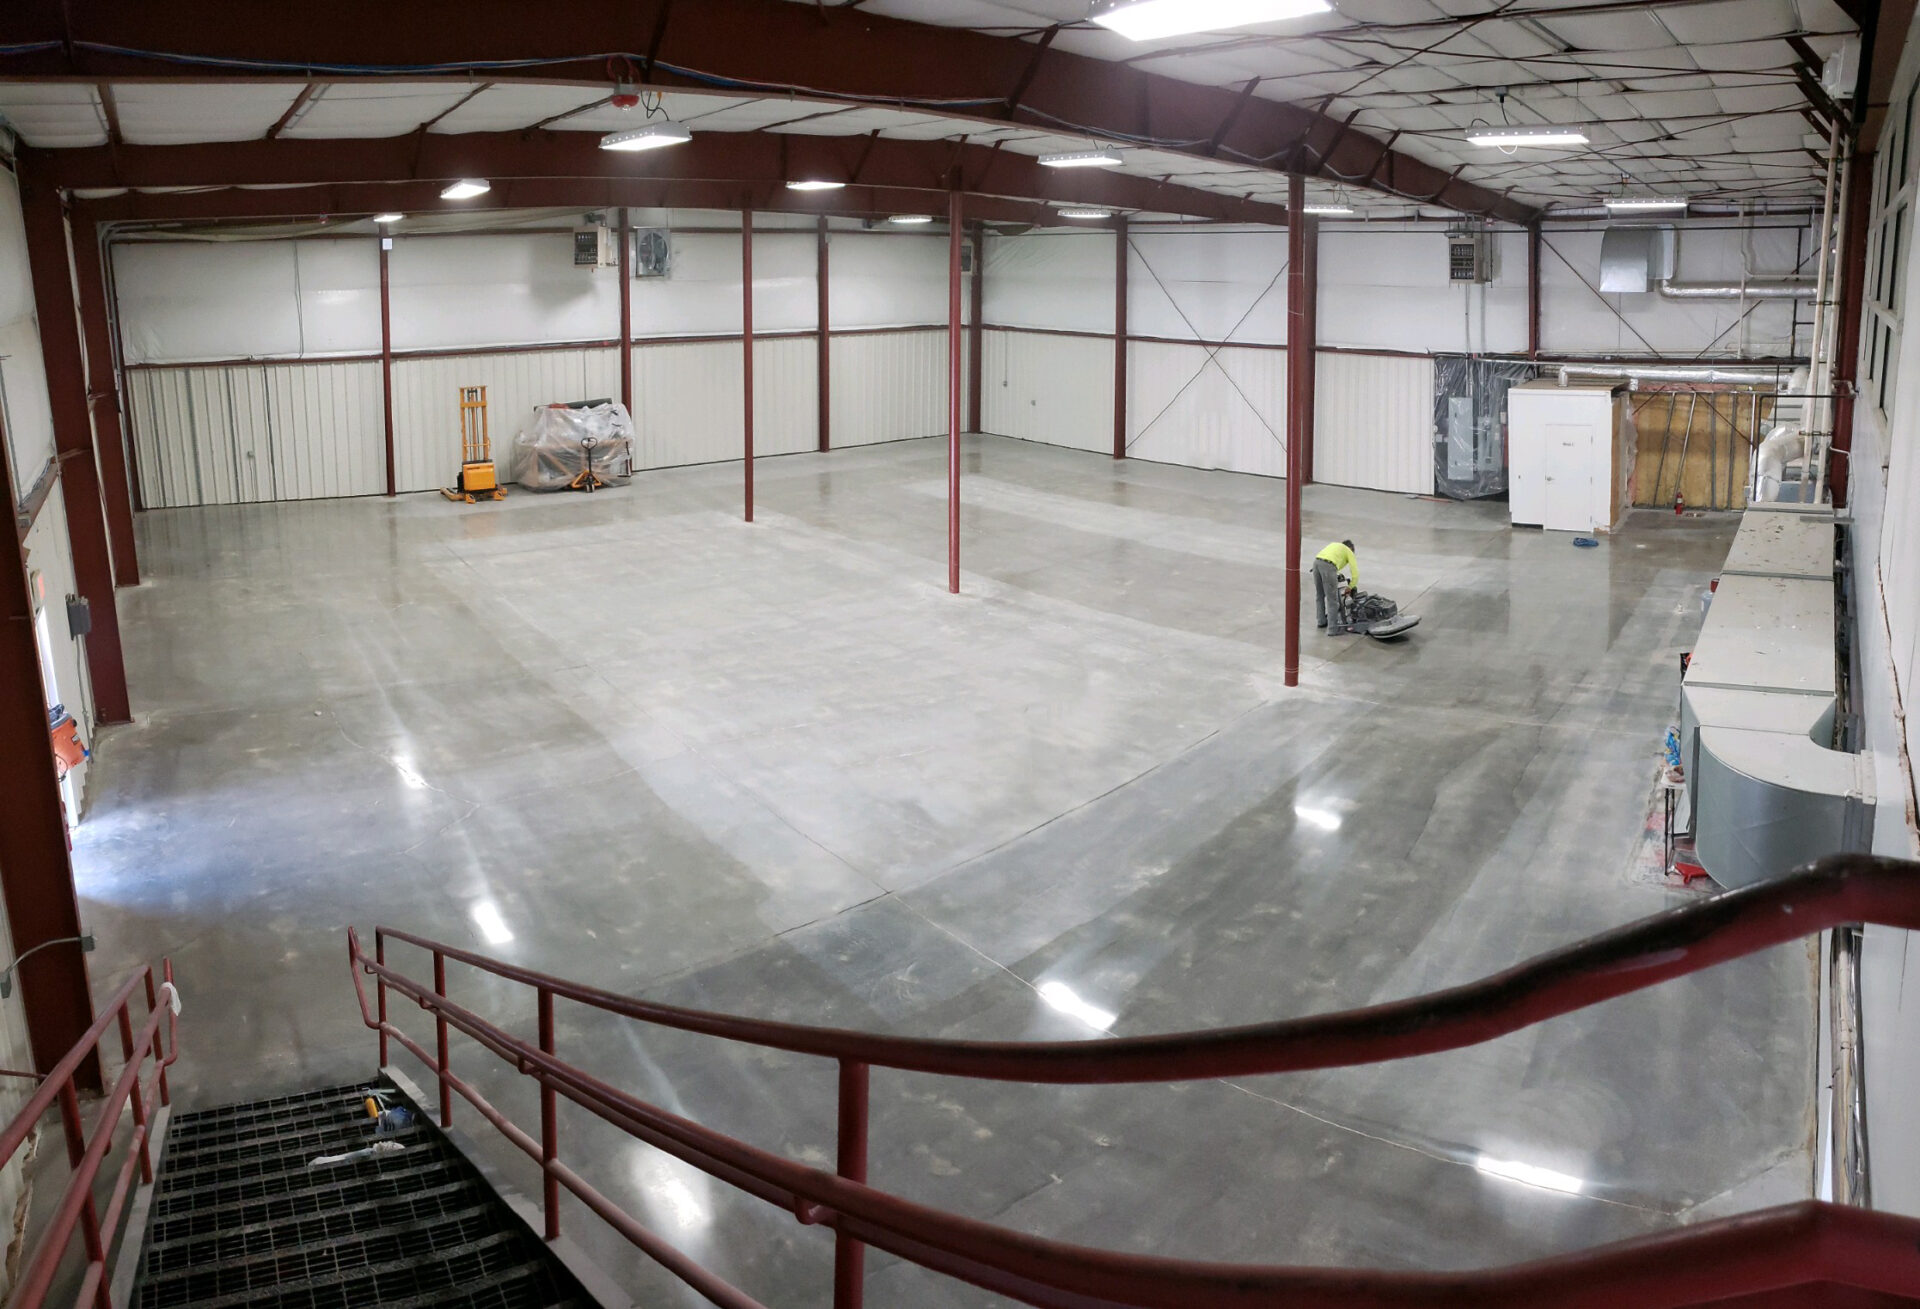 Storage units in Manchester, VT. The entire slab was ground, honed, densified, and polished to a 400 grit finish. The owner asked for the aisles to be shiny and more reflective. The aisles between the individual storage units were guarded and burnished to 800 grit